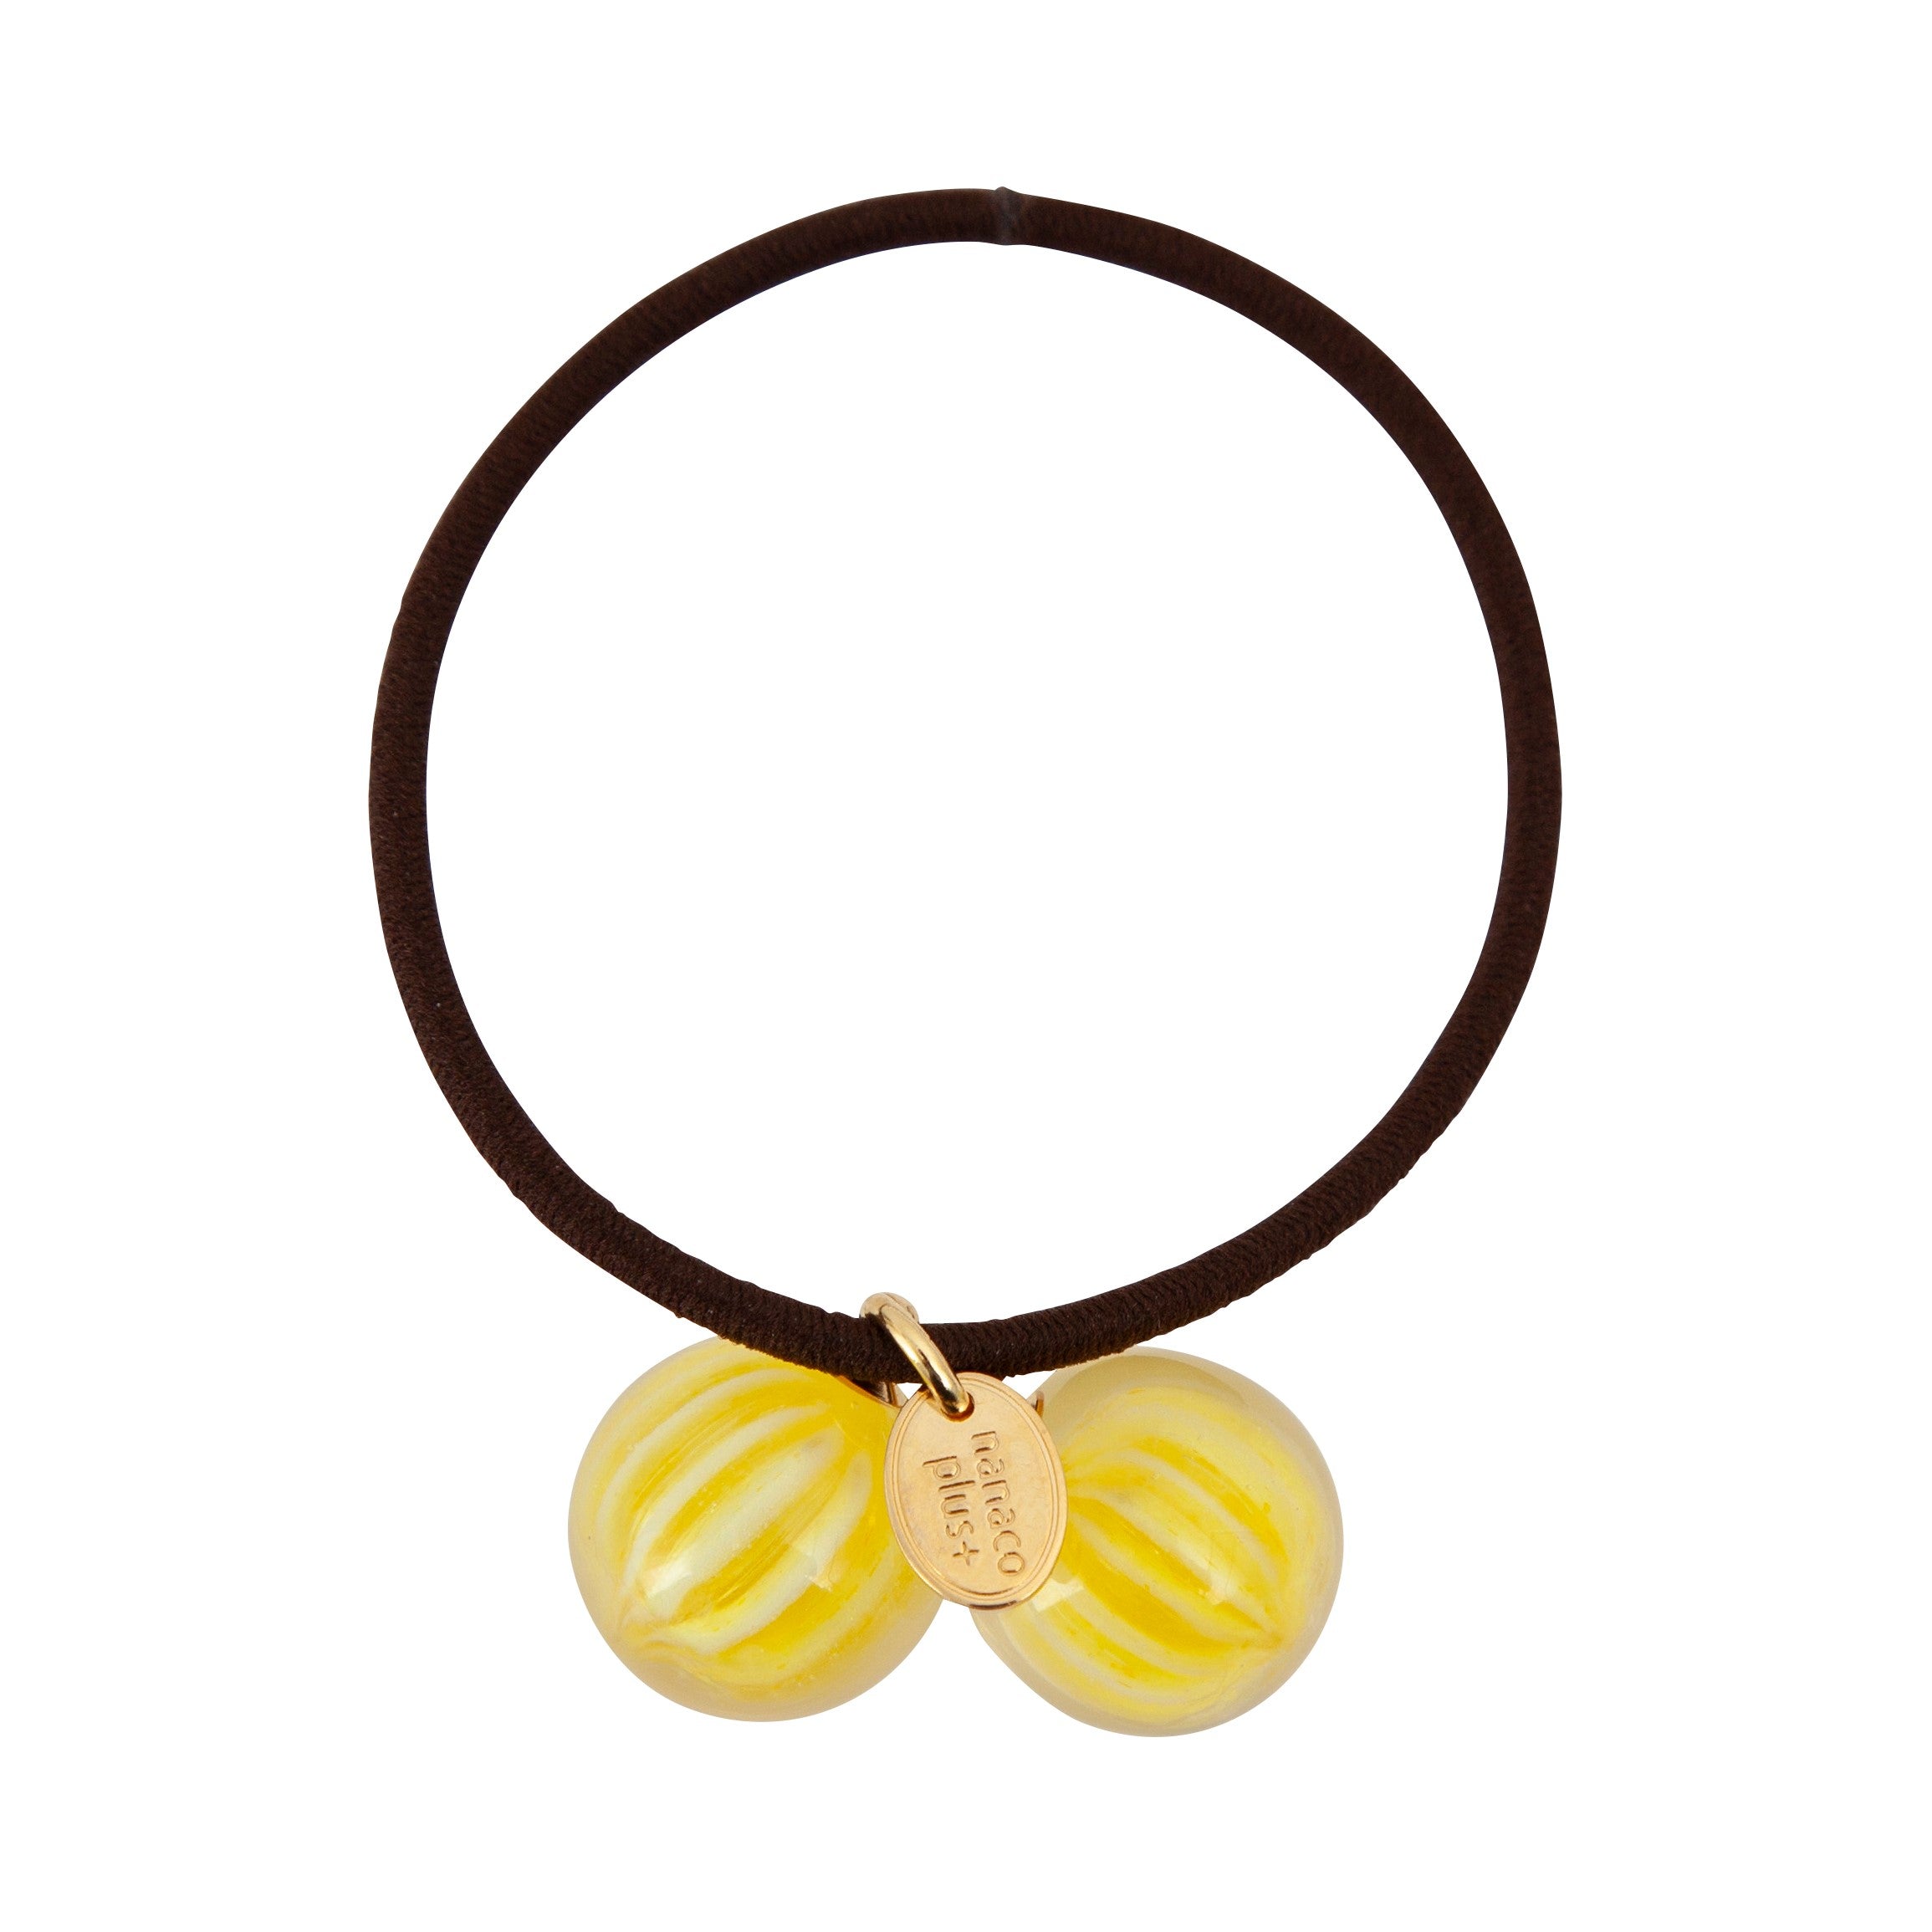 "Candy Hair Ties Small Lemon" Click here for products using small lemons.